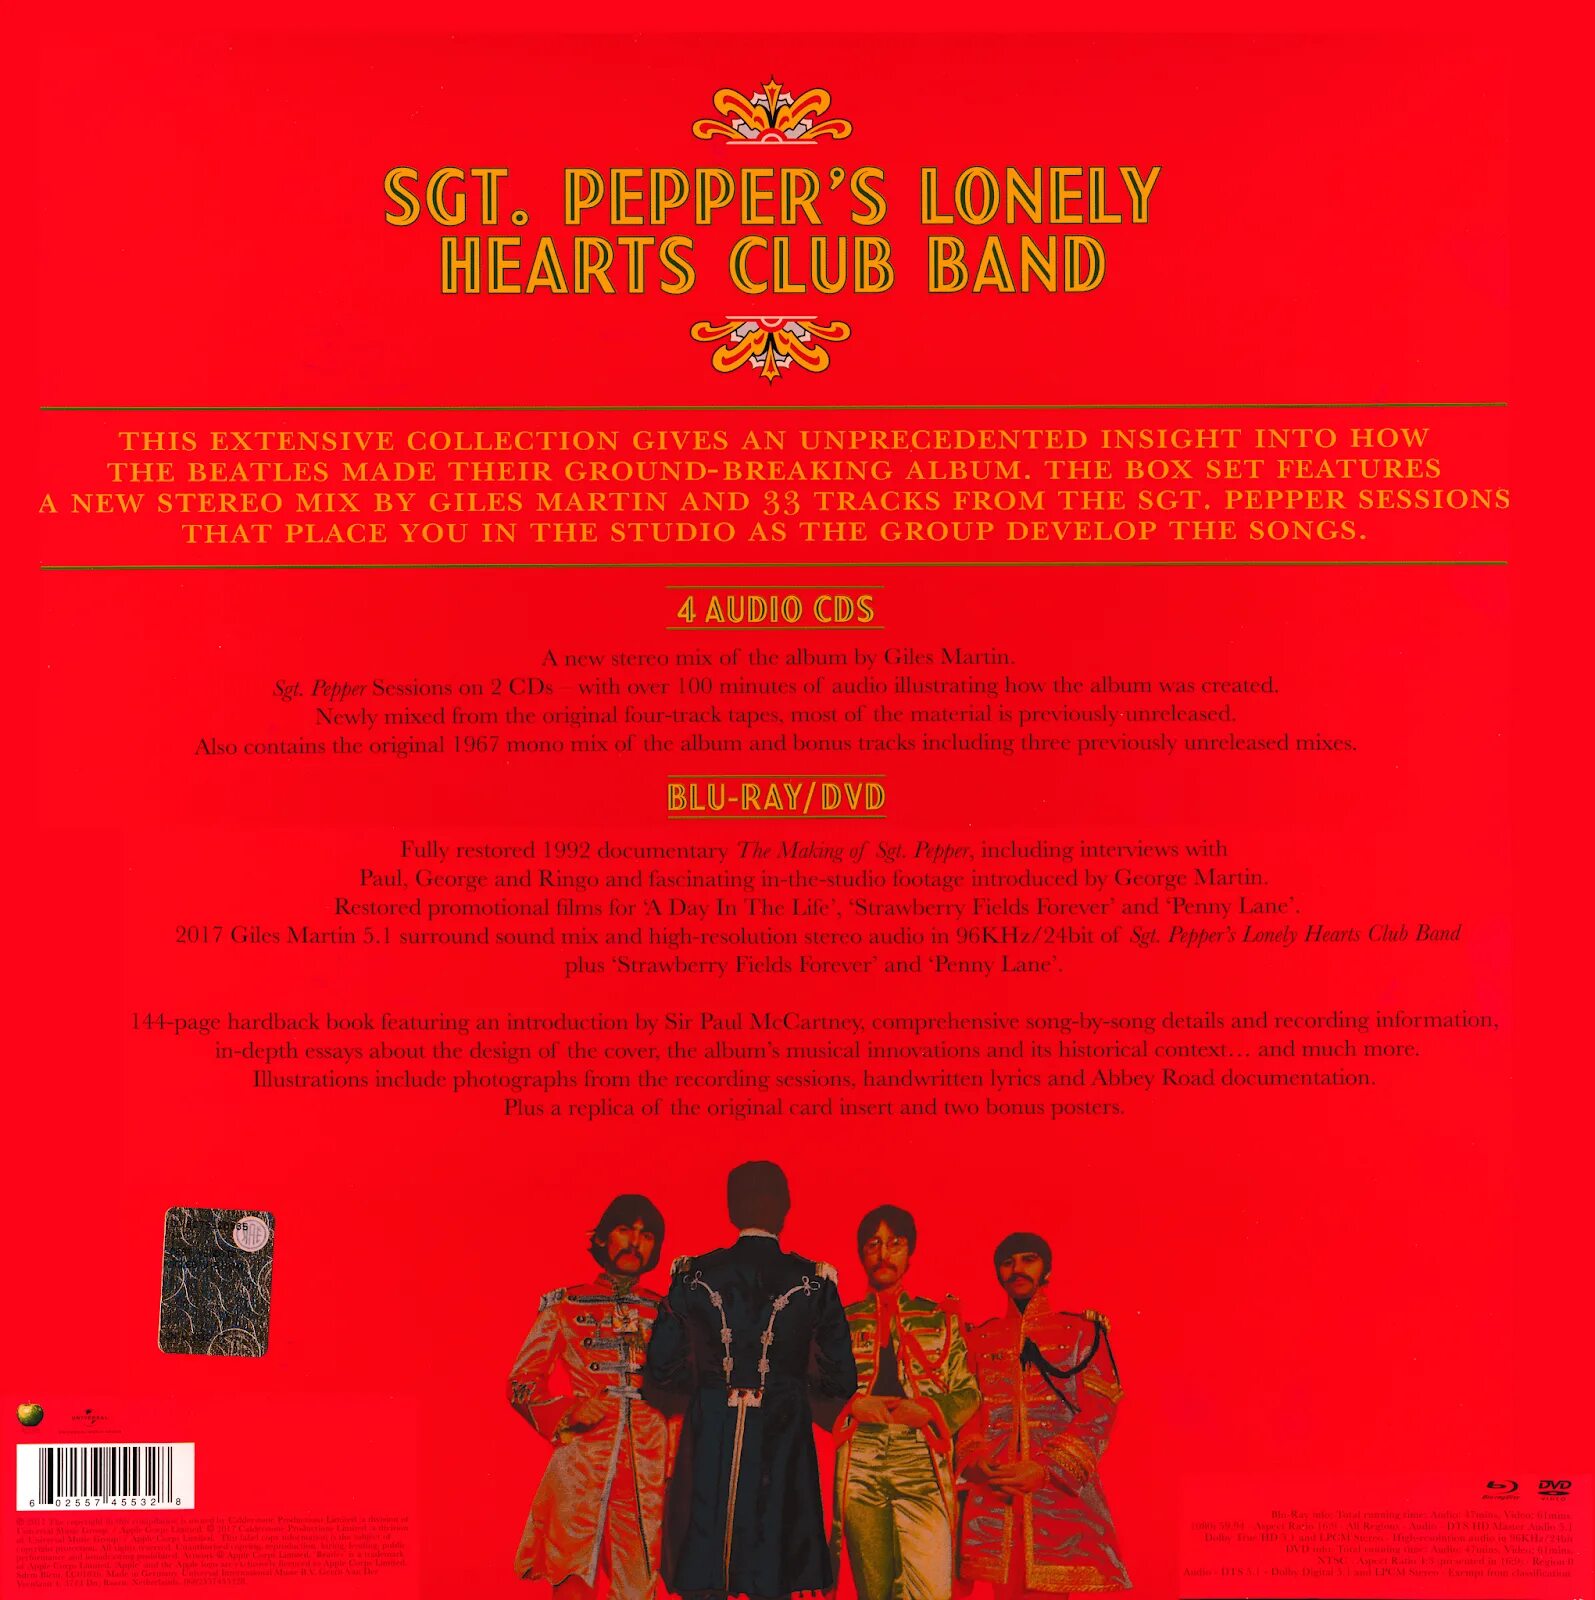 Beatles sgt peppers lonely hearts club. Sgt. Pepper’s Lonely Hearts Club Band the Beatles. Sgt Pepper's Lonely Hearts Club Band. The Beatles Sgt. Pepper's Lonely Hearts Club Band 2017. The Beatles Sgt Pepper оркестр 1967.